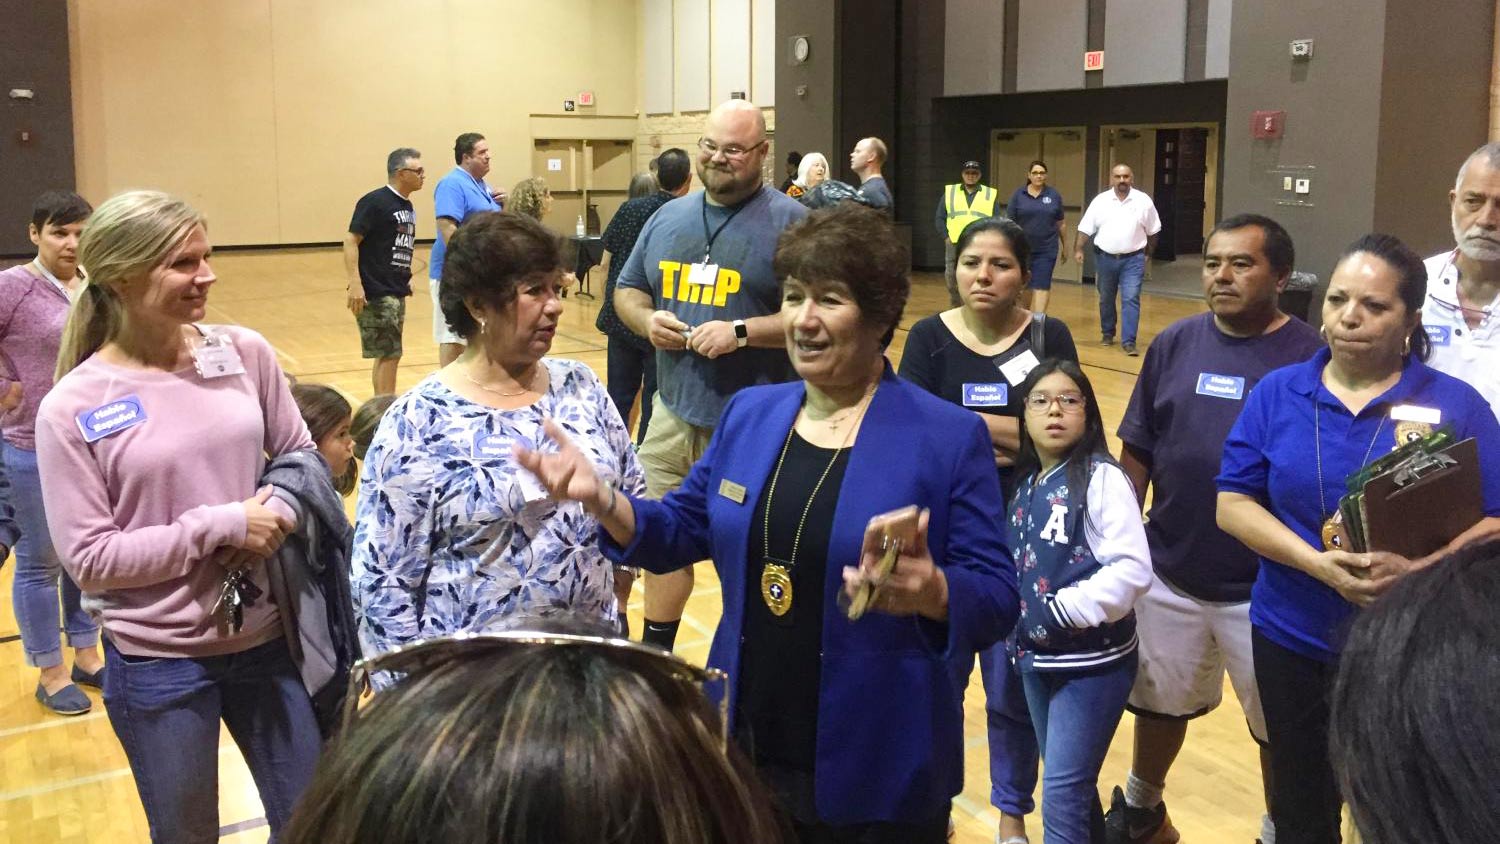 Rev. Magdalena Schwartz, center with blue jacket, briefs volunteers on Oct. 17 at Central Christian Church in Mesa before a large group of undocumented immigrant families and asylum seekers are dropped by federal authorities.
